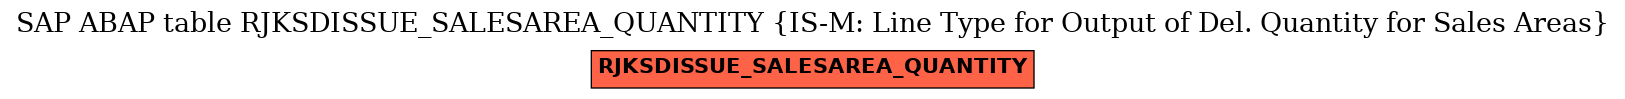 E-R Diagram for table RJKSDISSUE_SALESAREA_QUANTITY (IS-M: Line Type for Output of Del. Quantity for Sales Areas)